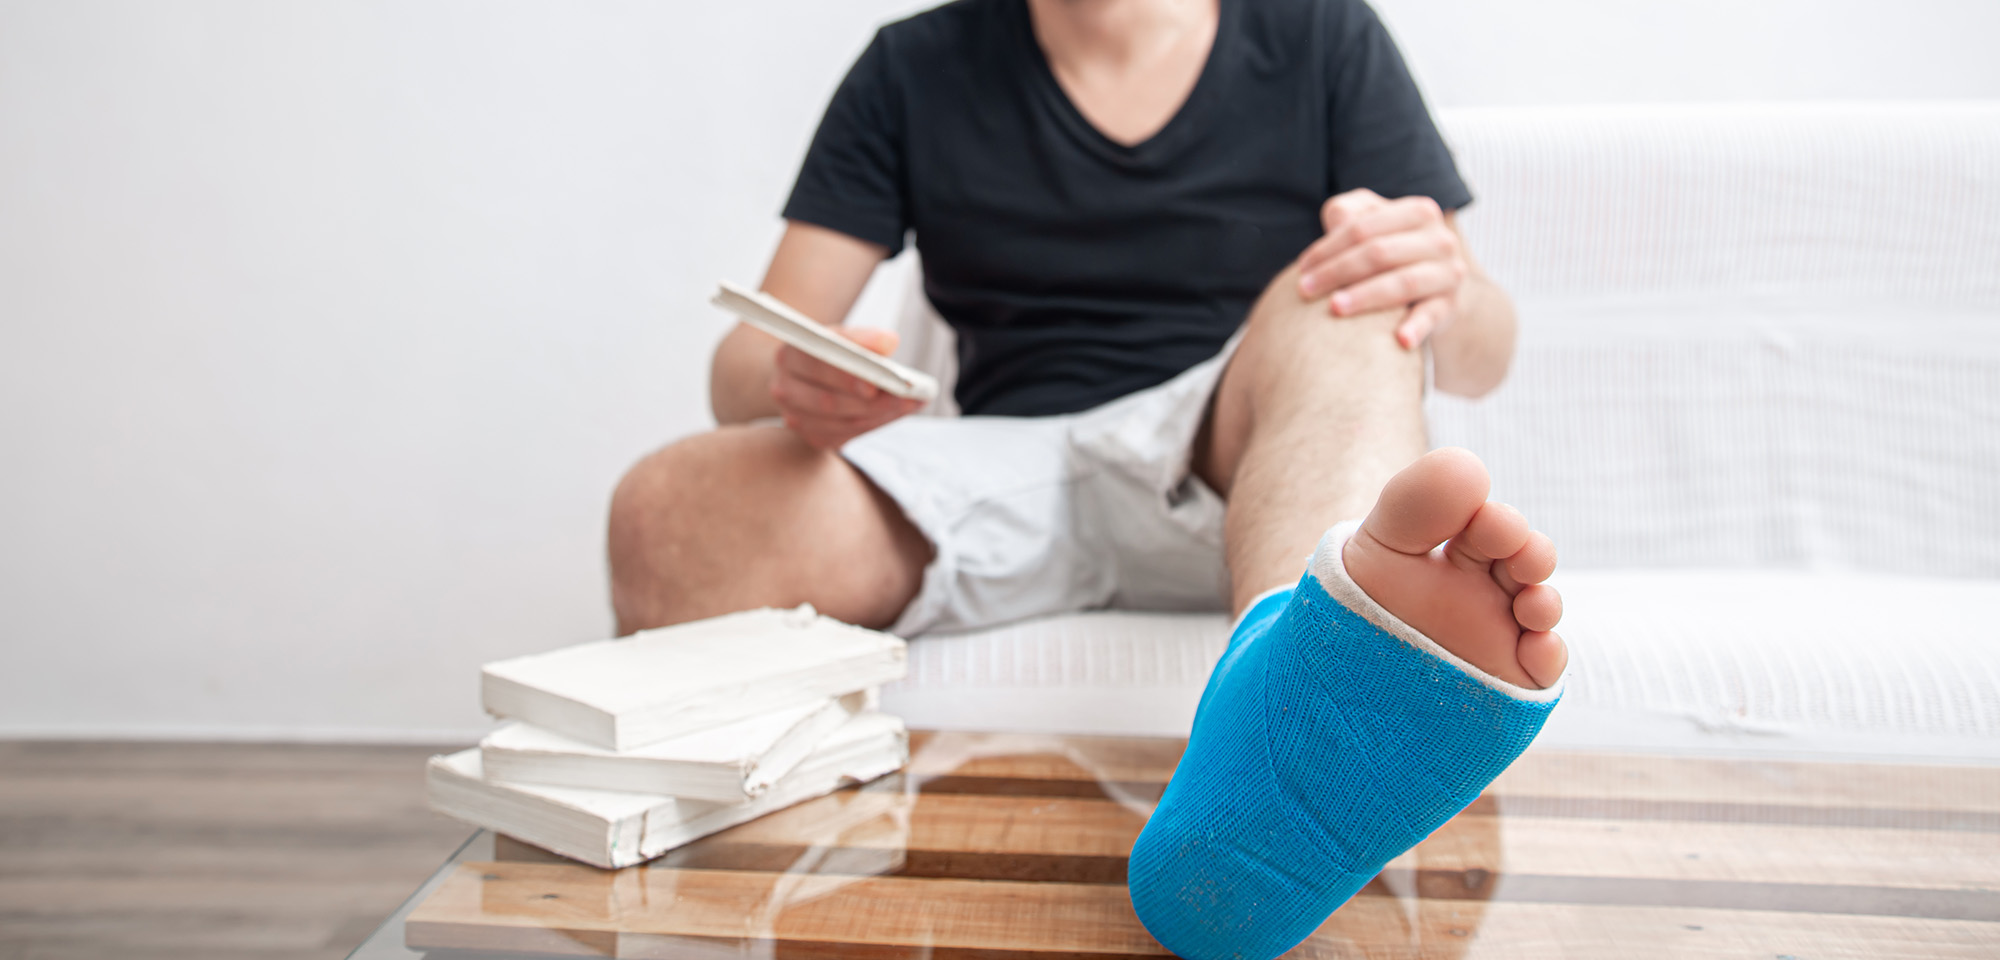 Most Common Foot and Ankle Injuries and How to Treat Them